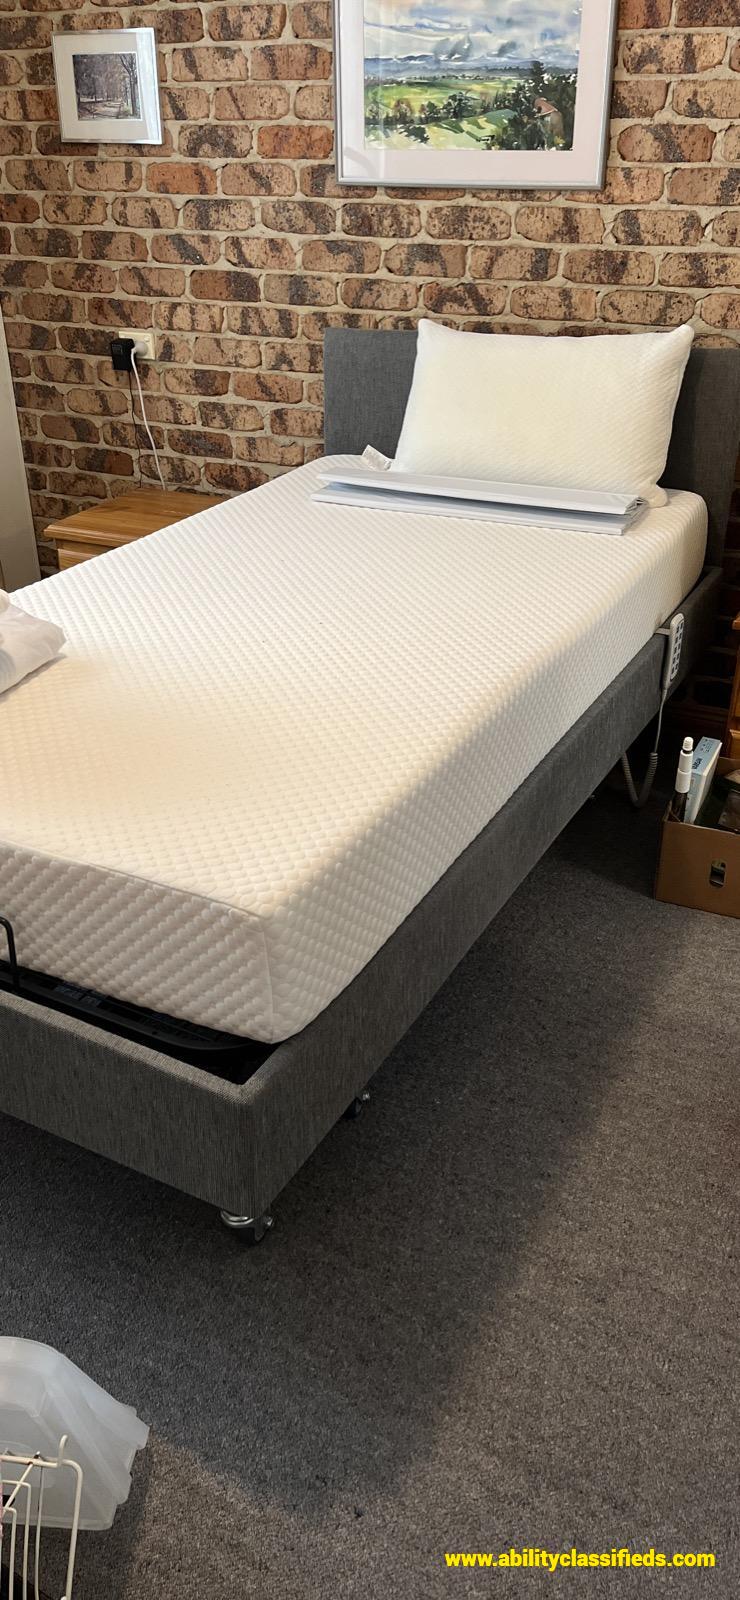 Excellent adjustable elderly bed - not a year old